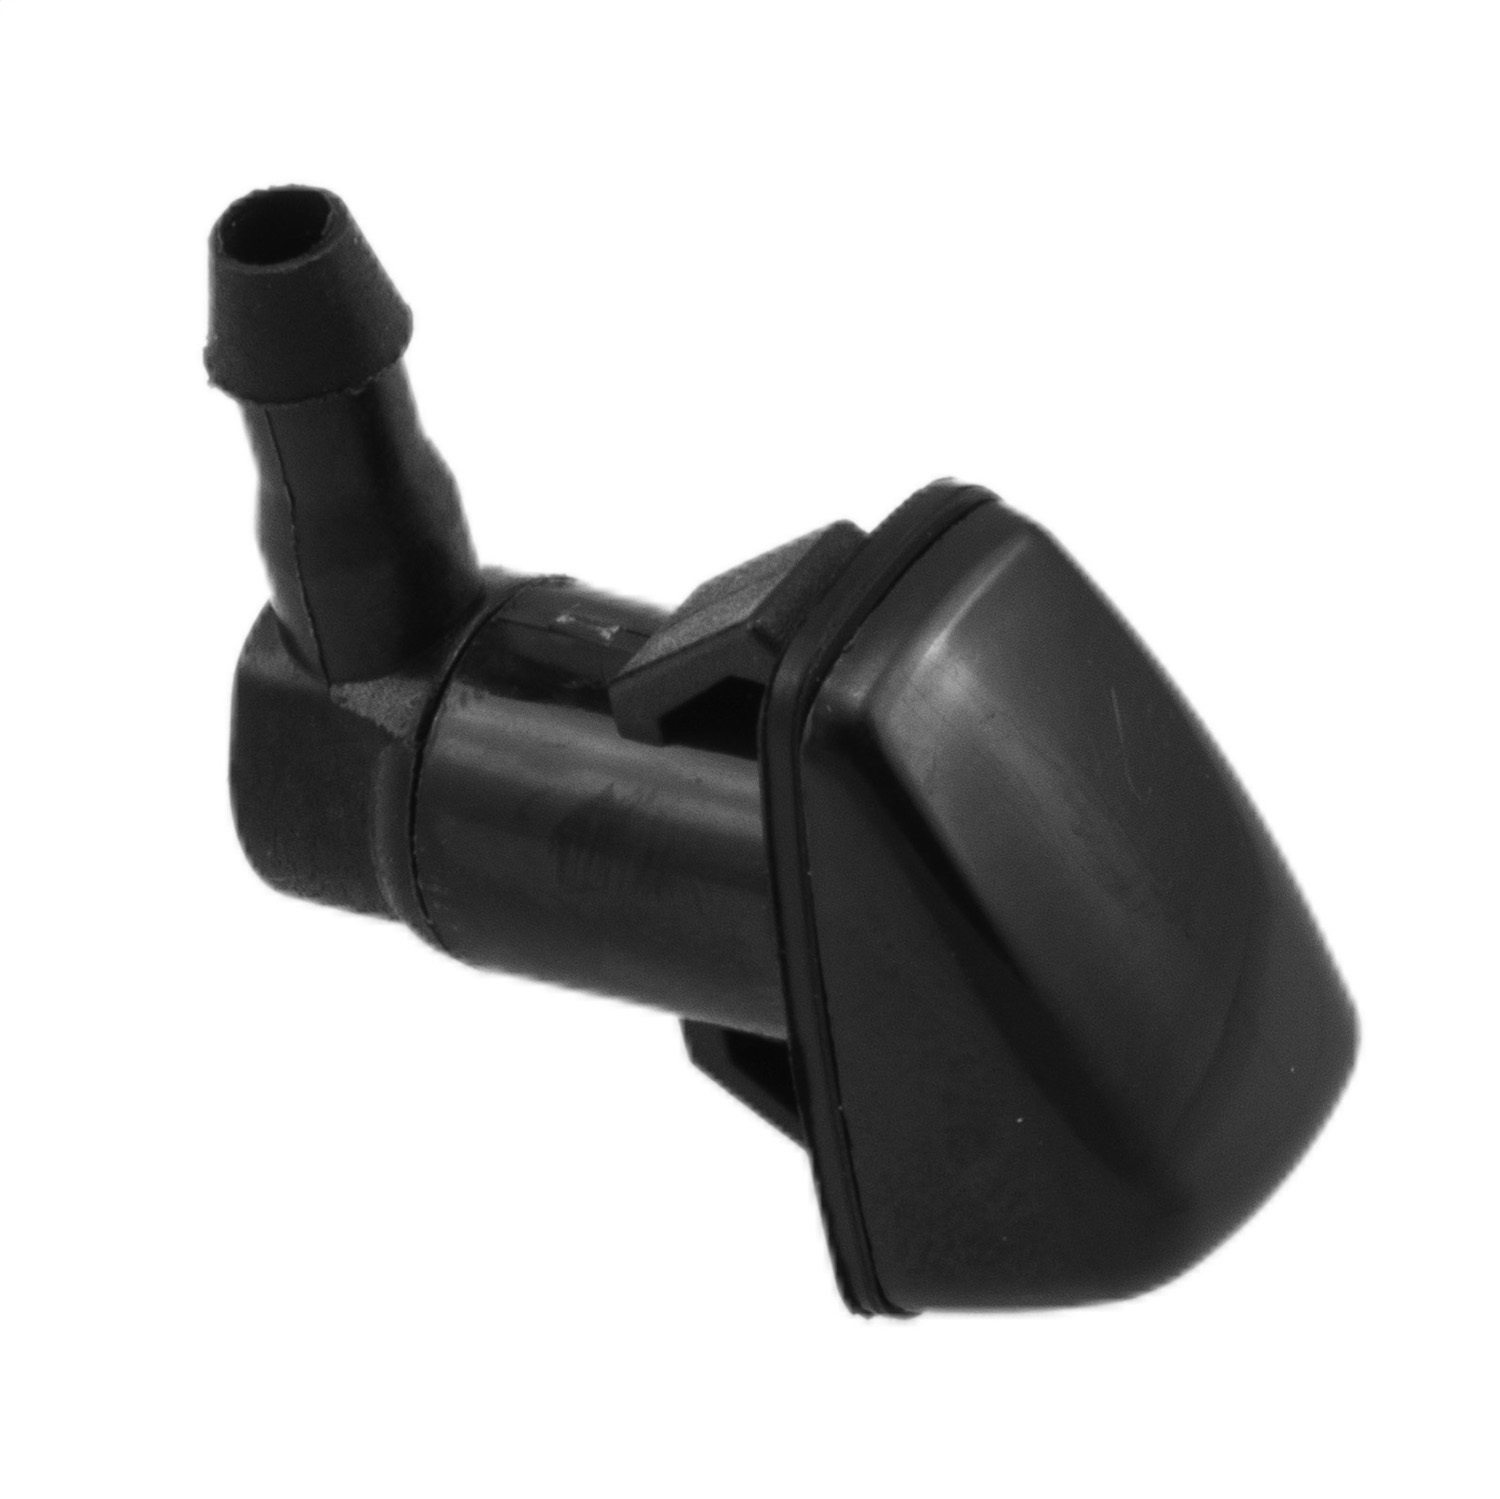 Omix This Windshield Washer Nozzle From Omix-Ada Fits 08-12 Jeep Libery Kk., BKGF-19718.05